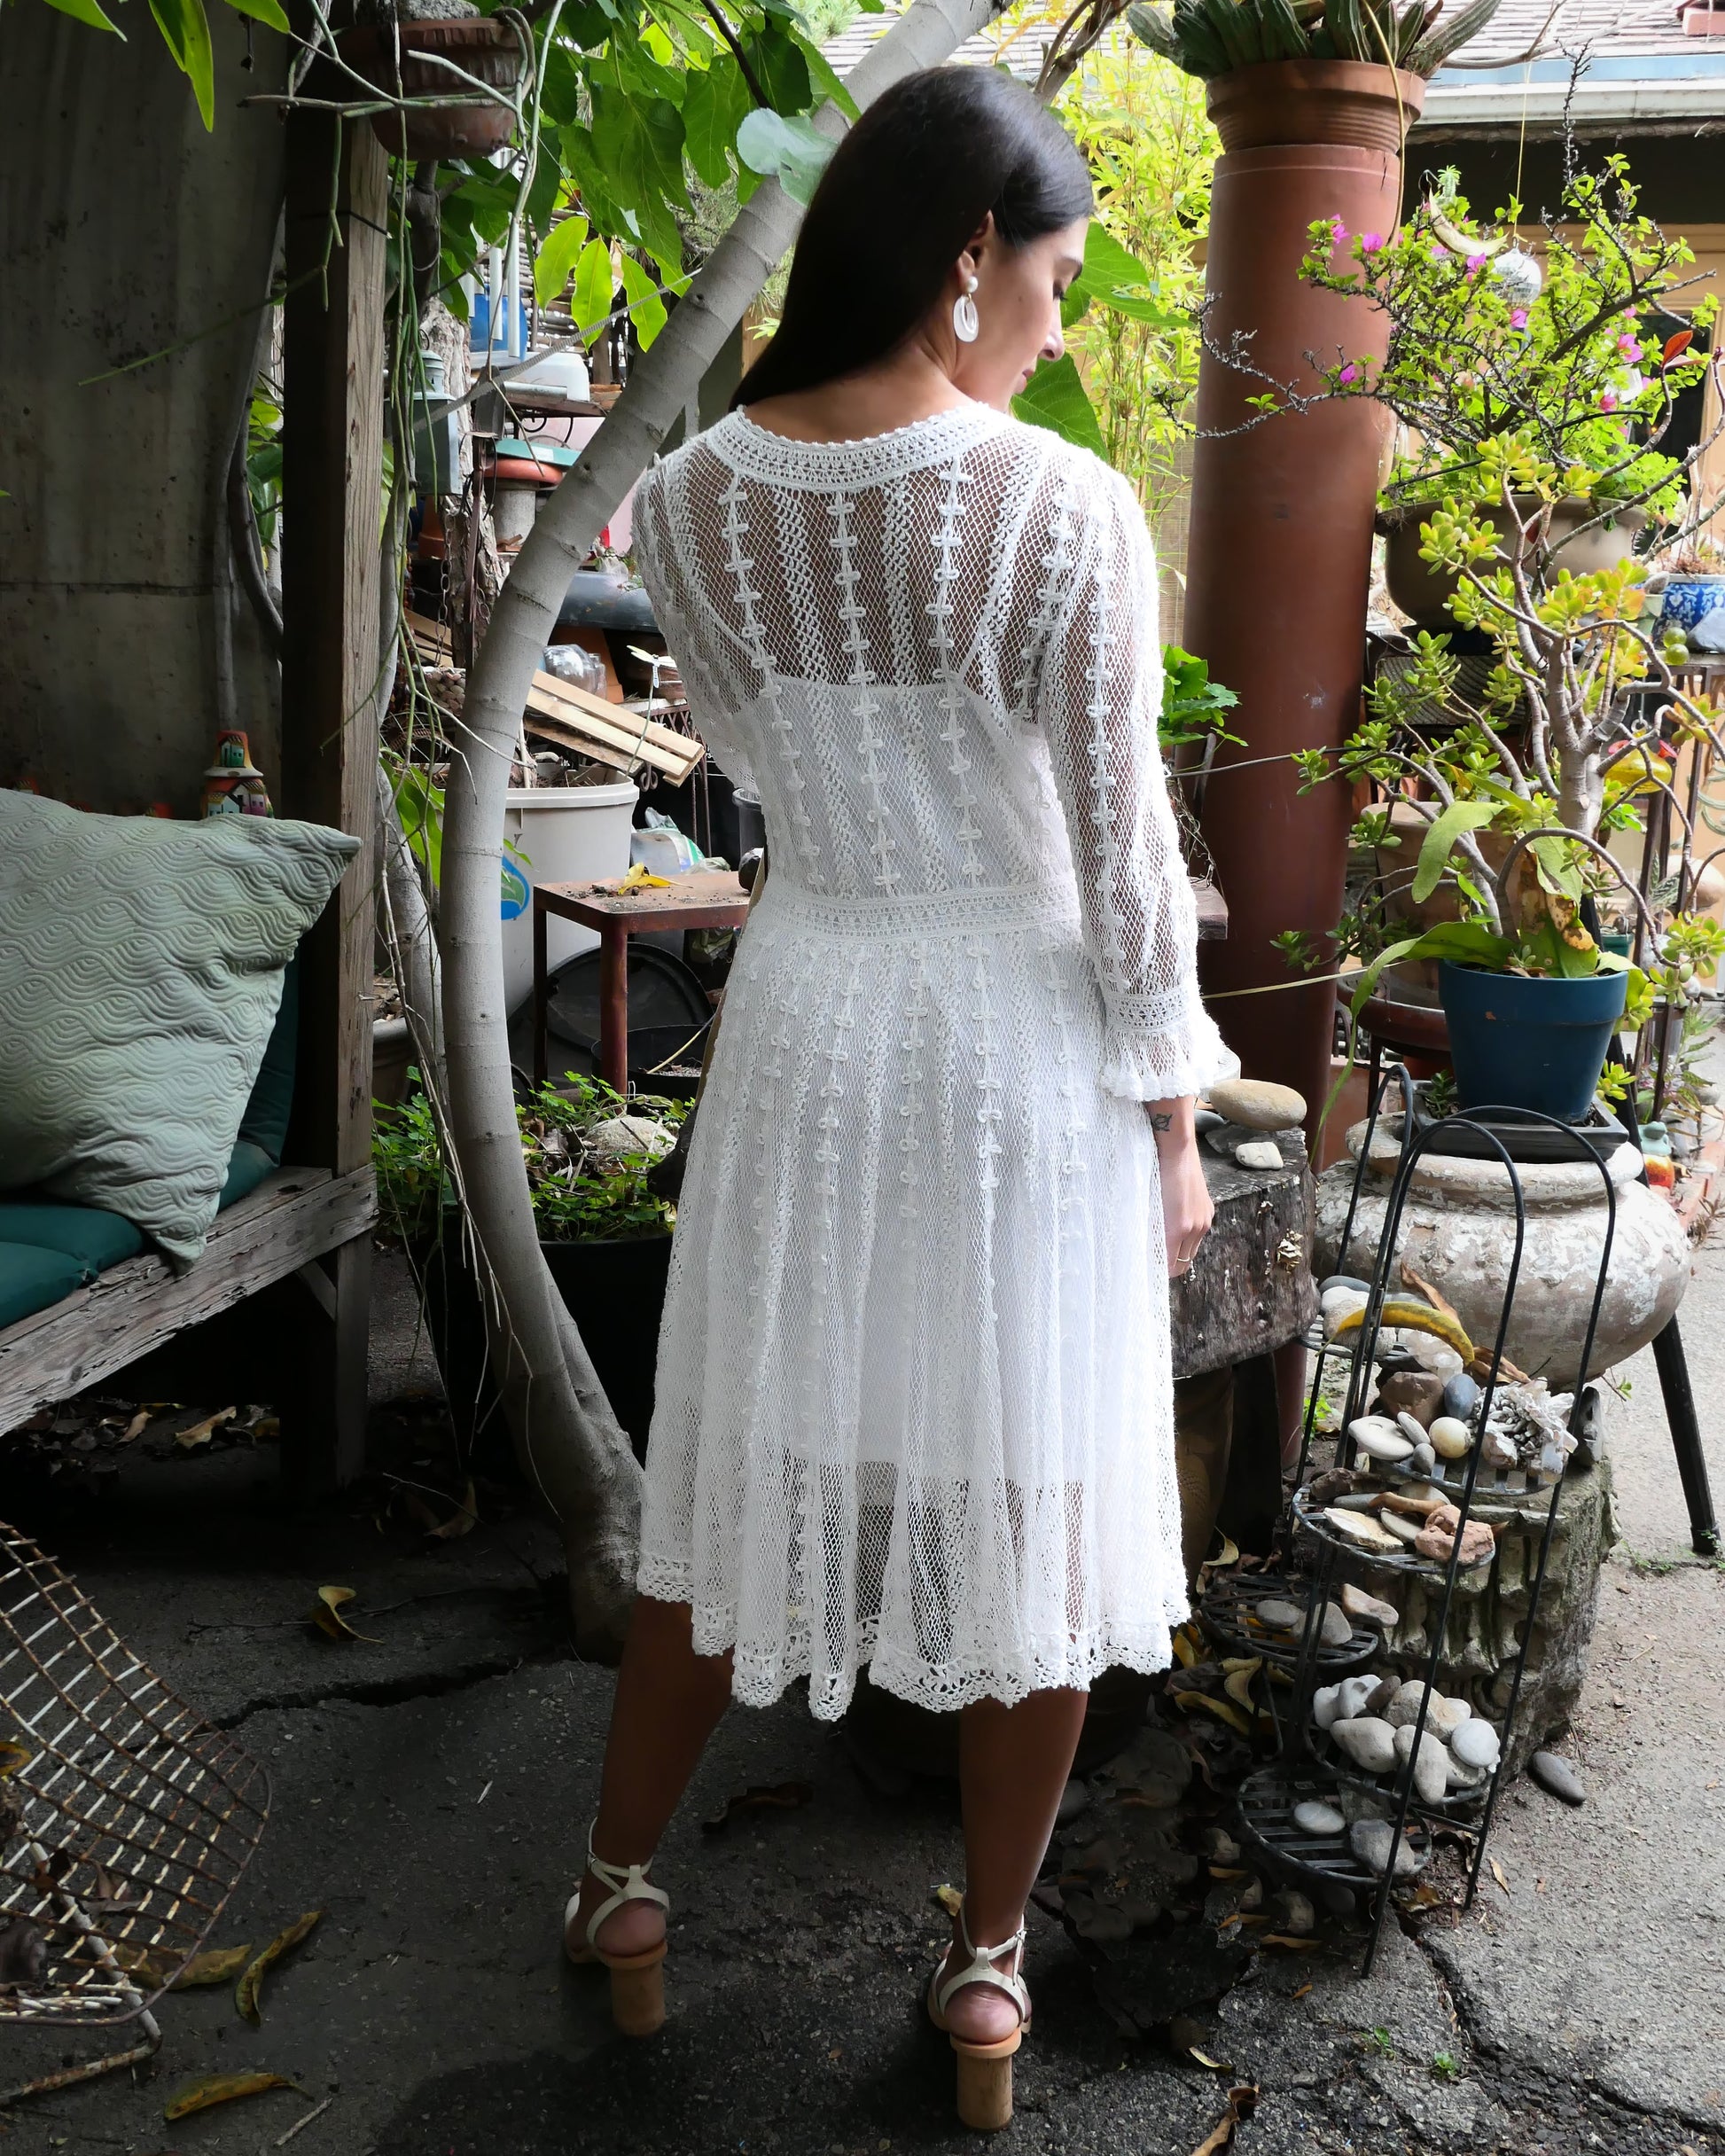 Back of dress. Lim's Vintage original crochet cottage core style dress. This dreamy midi length dress can be worn buttoned up the front or back and is made with very fine threads, making the dress refined and sheer. Detailed crochet trim is used for the waist, hemline, and 3/4 length ruffled sleeves. Wear it with a natural or pink colored slip or bandeau bra and bikini shorts and a pair of ankle or knee-high boots to complete the look.